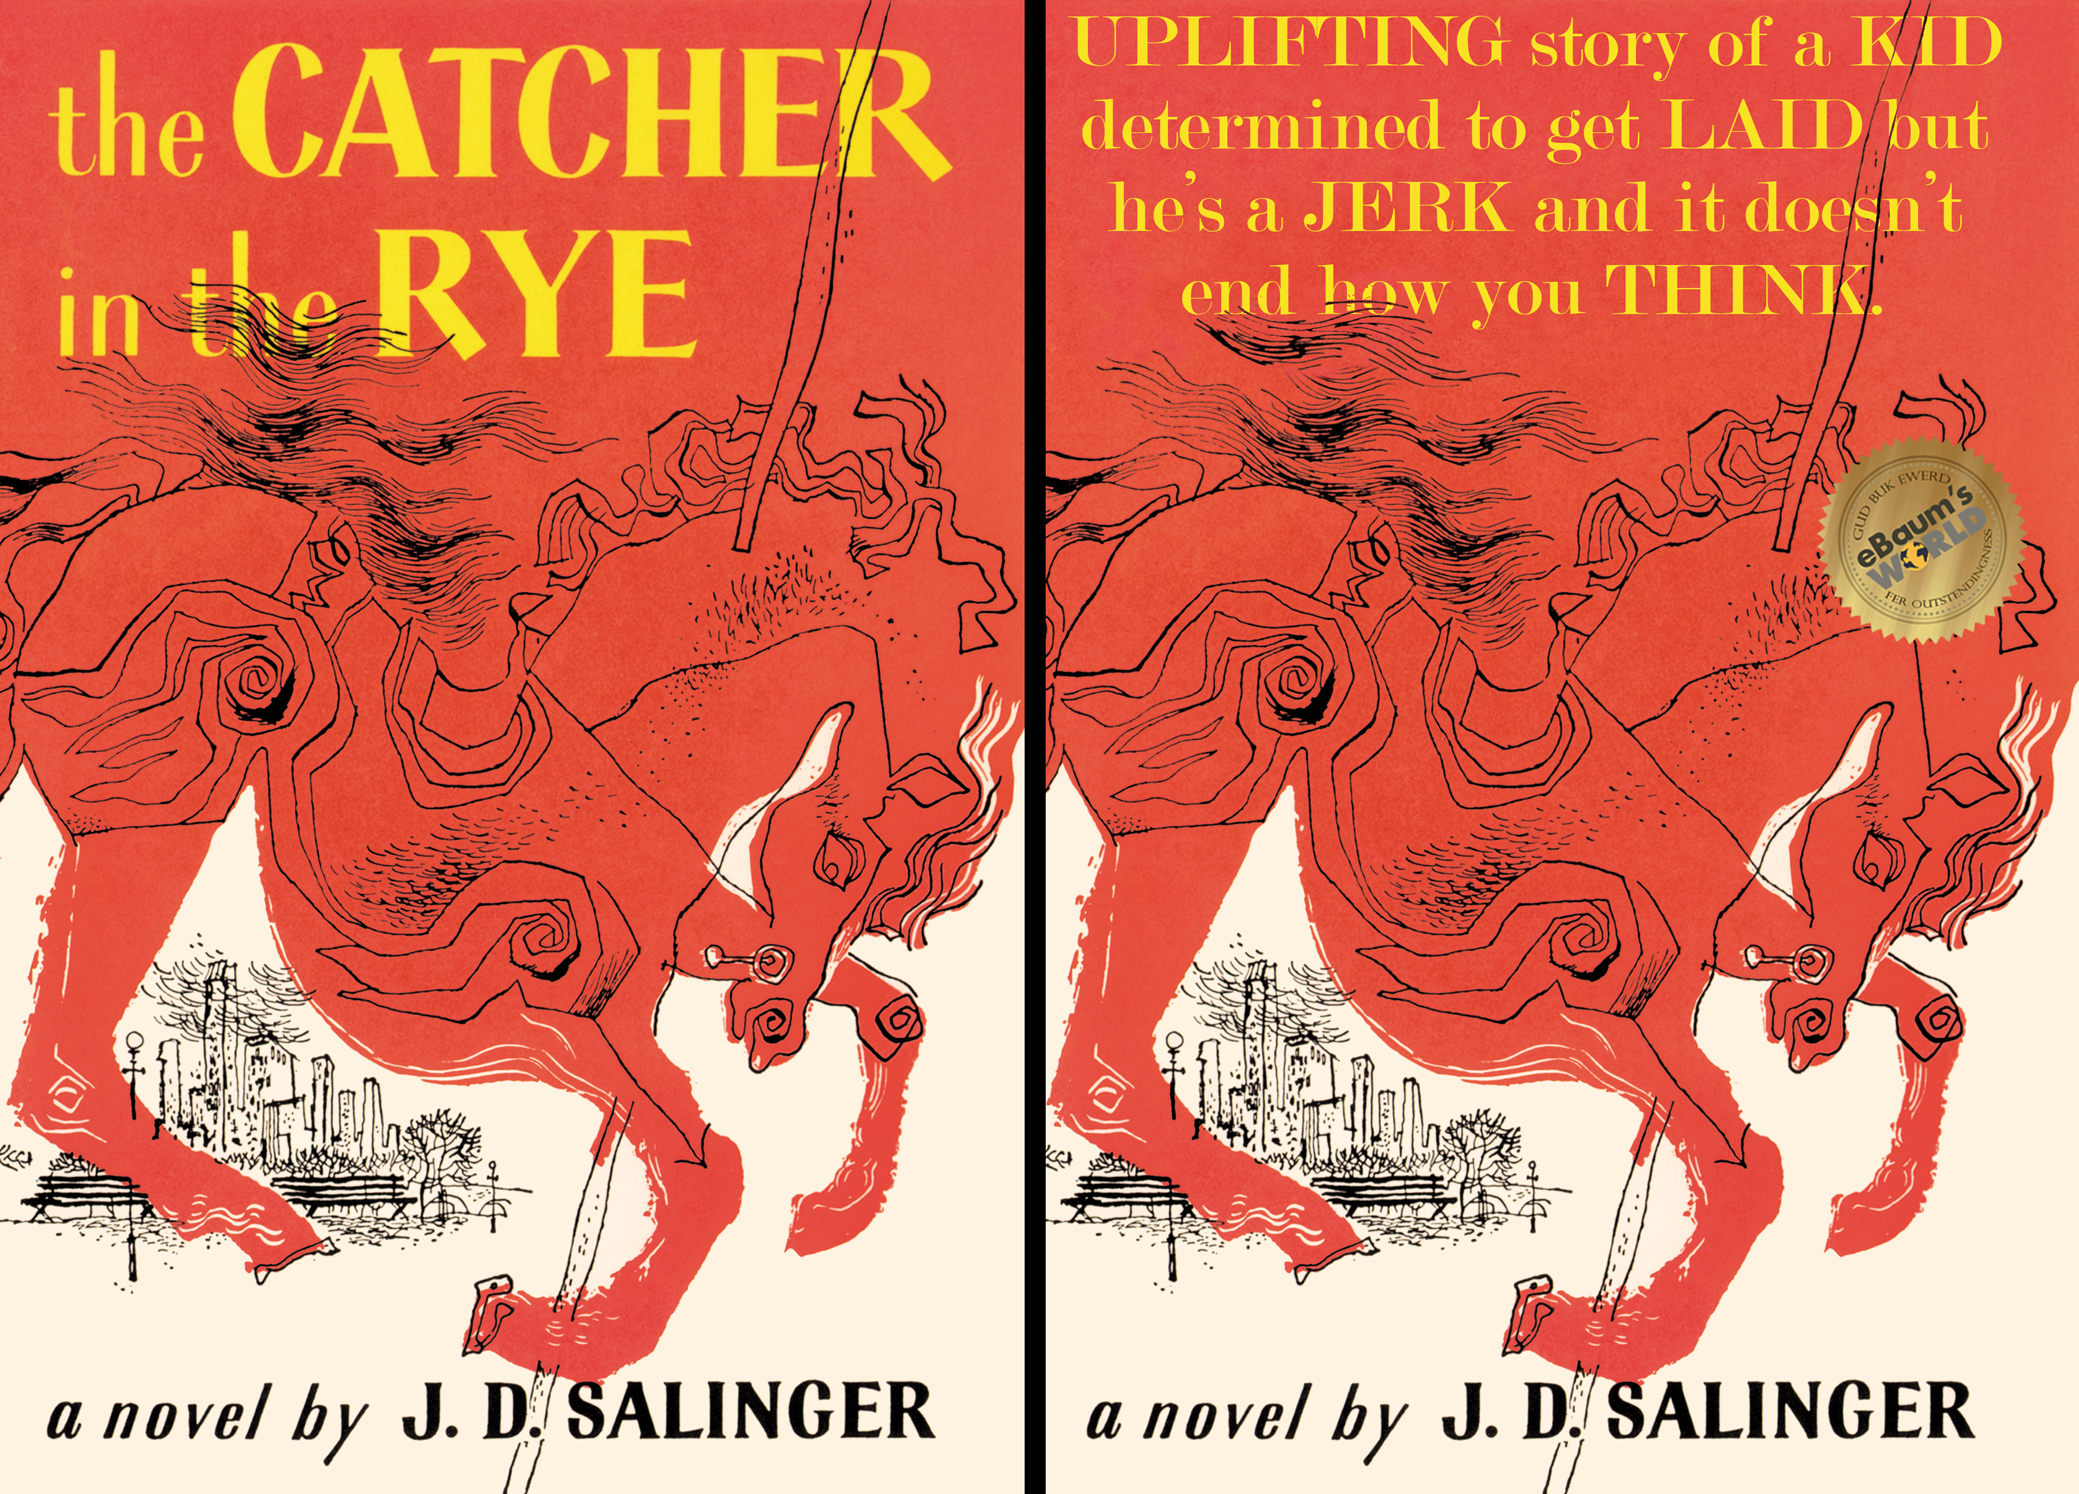 catcher in the rye cover - the Catcher in the Rye Uplifting story of a Kid determined to get Laid but he's a Jerk and it doesn't end how you Thints! R a novel by J. D. Salinger a novel by J. D. Salinger